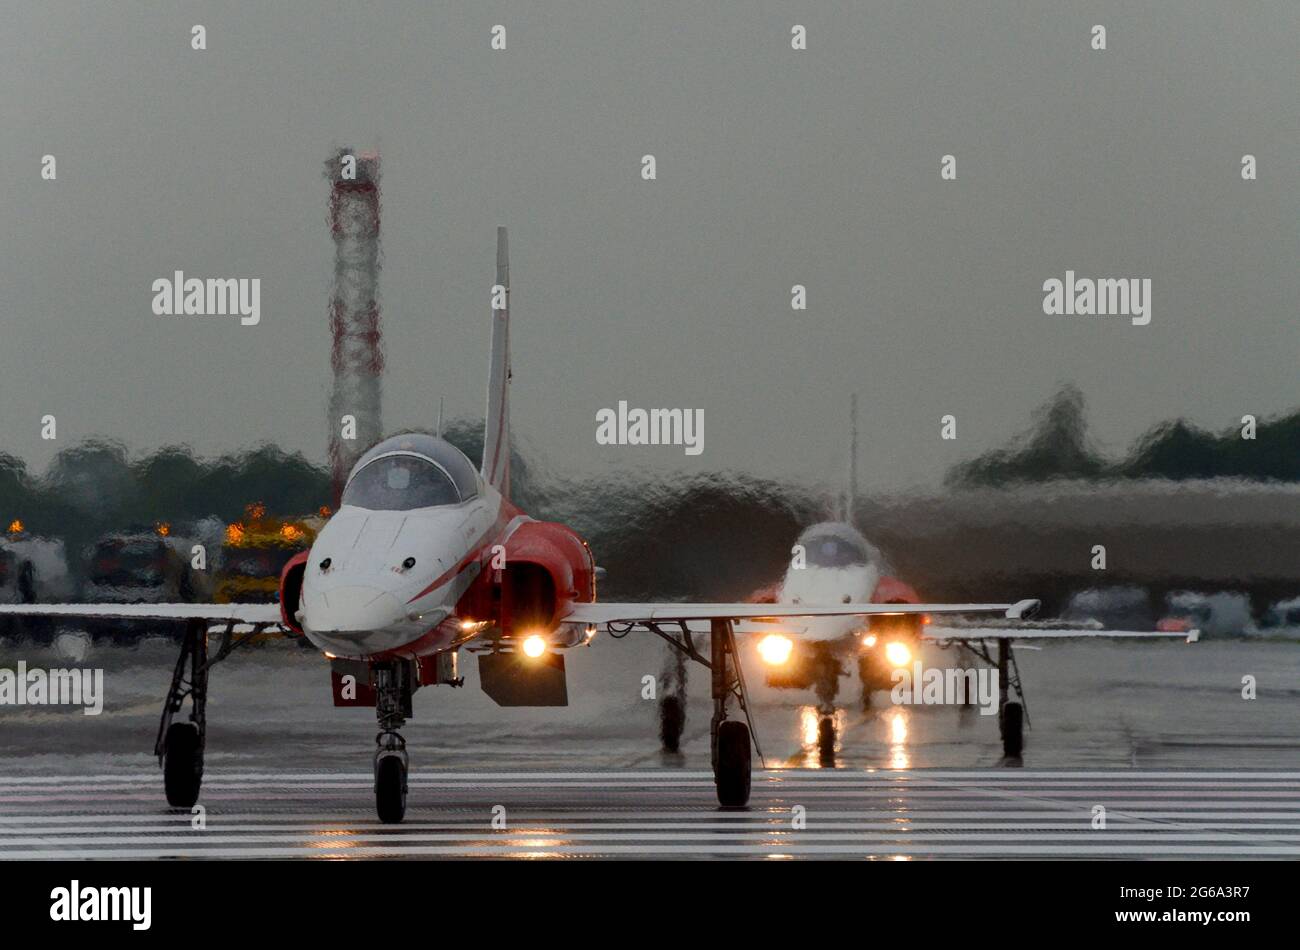 Patrouille Suisse, Swiss display team fighter jet planes arriving at the Royal International Air Tattoo, UK, in typical English summer rain weather Stock Photo